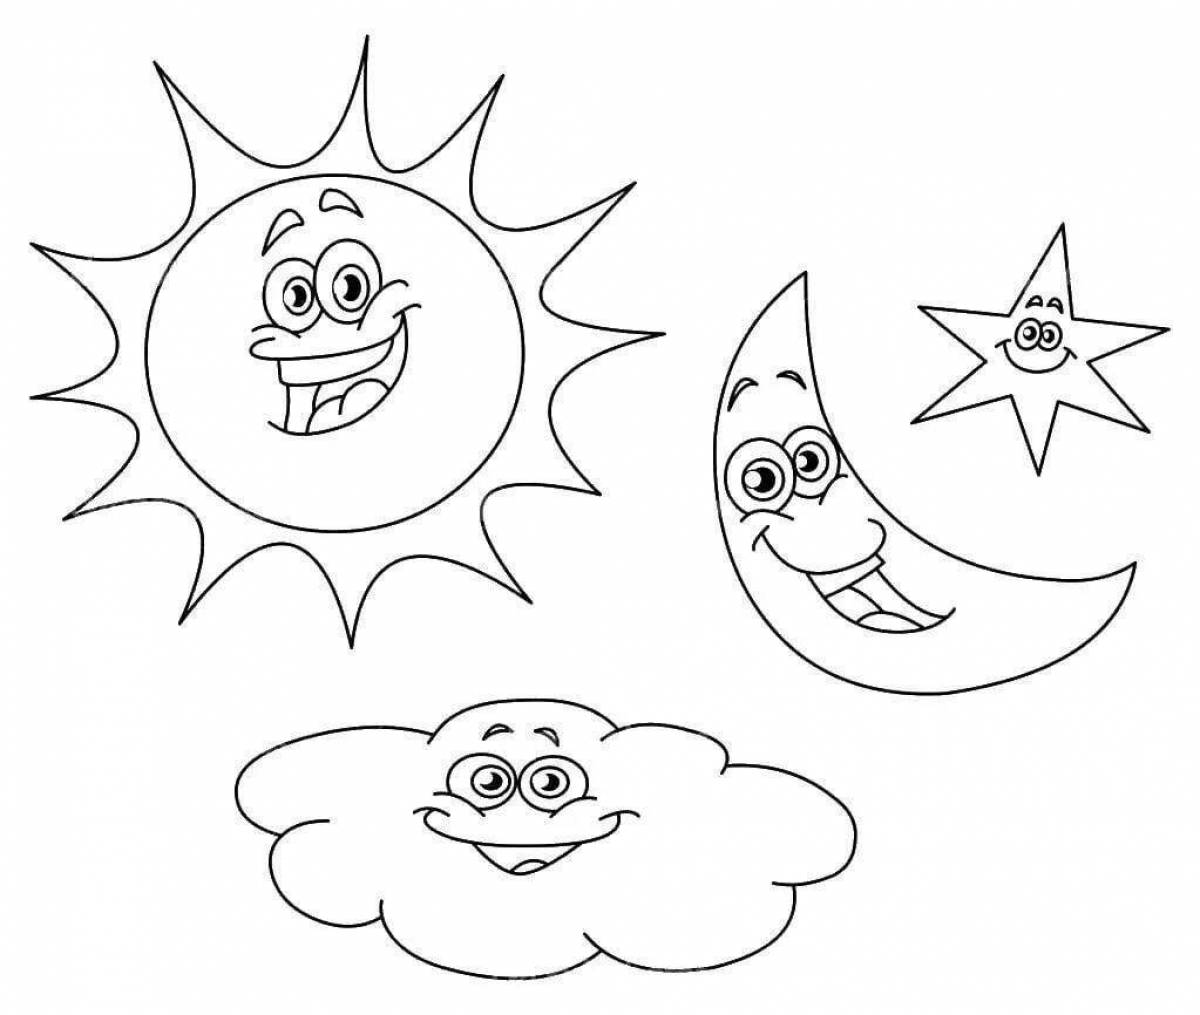 Moon and sun for kids #7